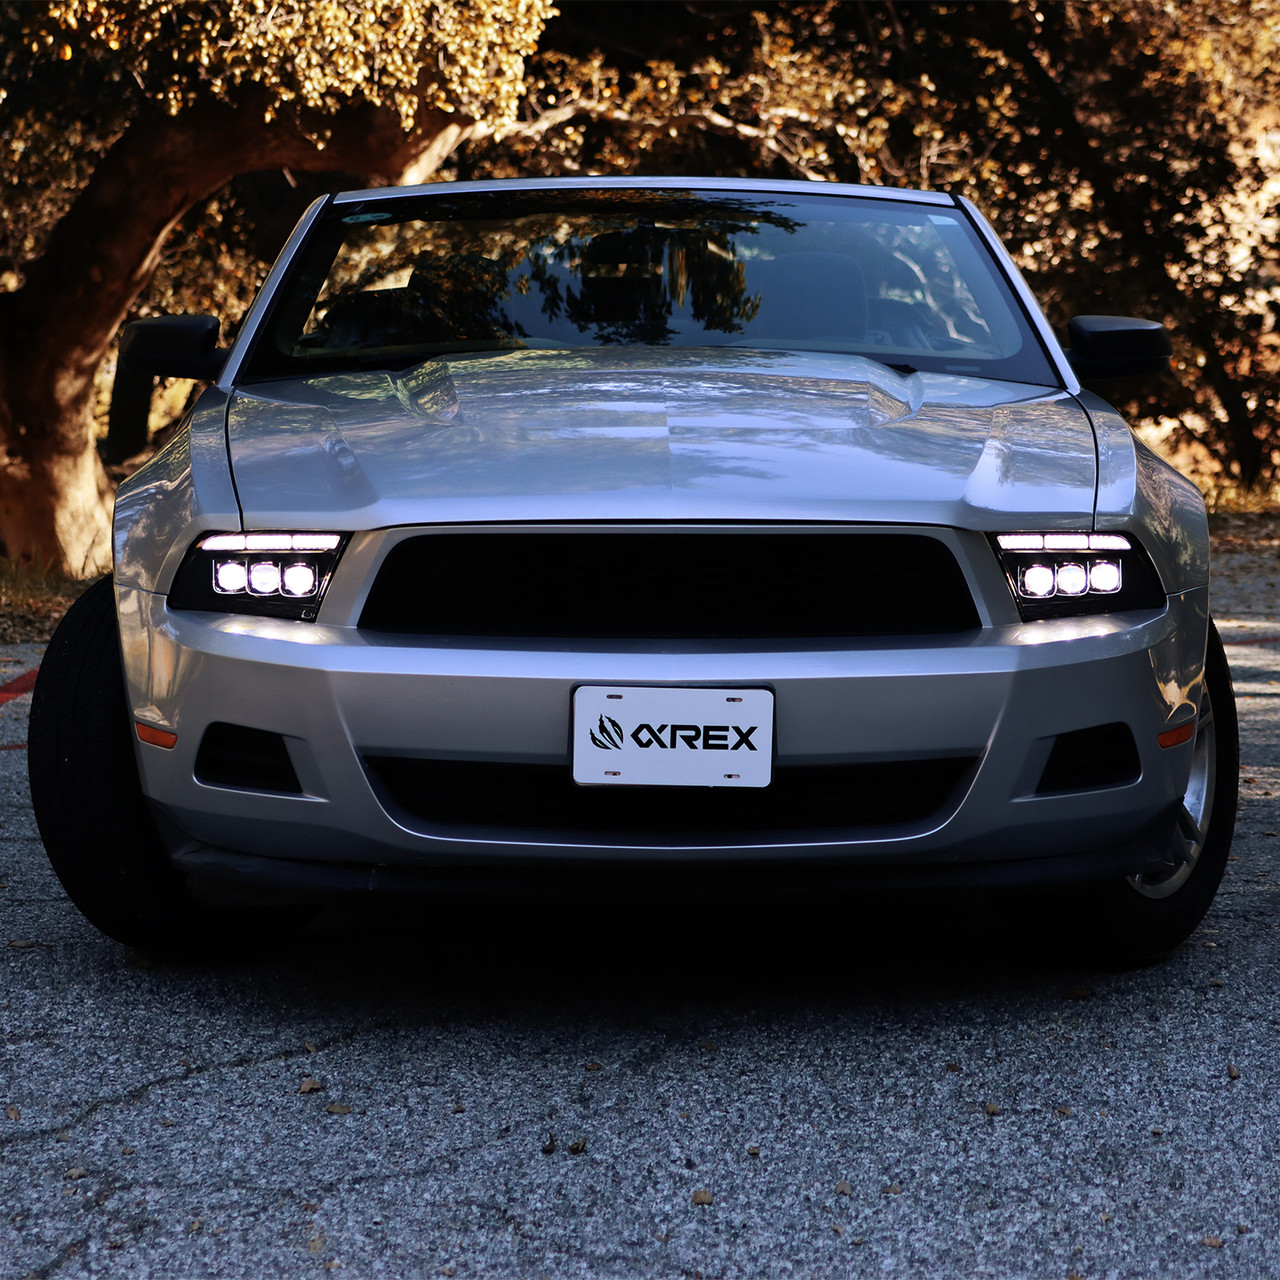  Alpharex MK II NOVA-Series LED Projector Headlights Black for 2010 to 2012 Ford Mustang (880489)This View